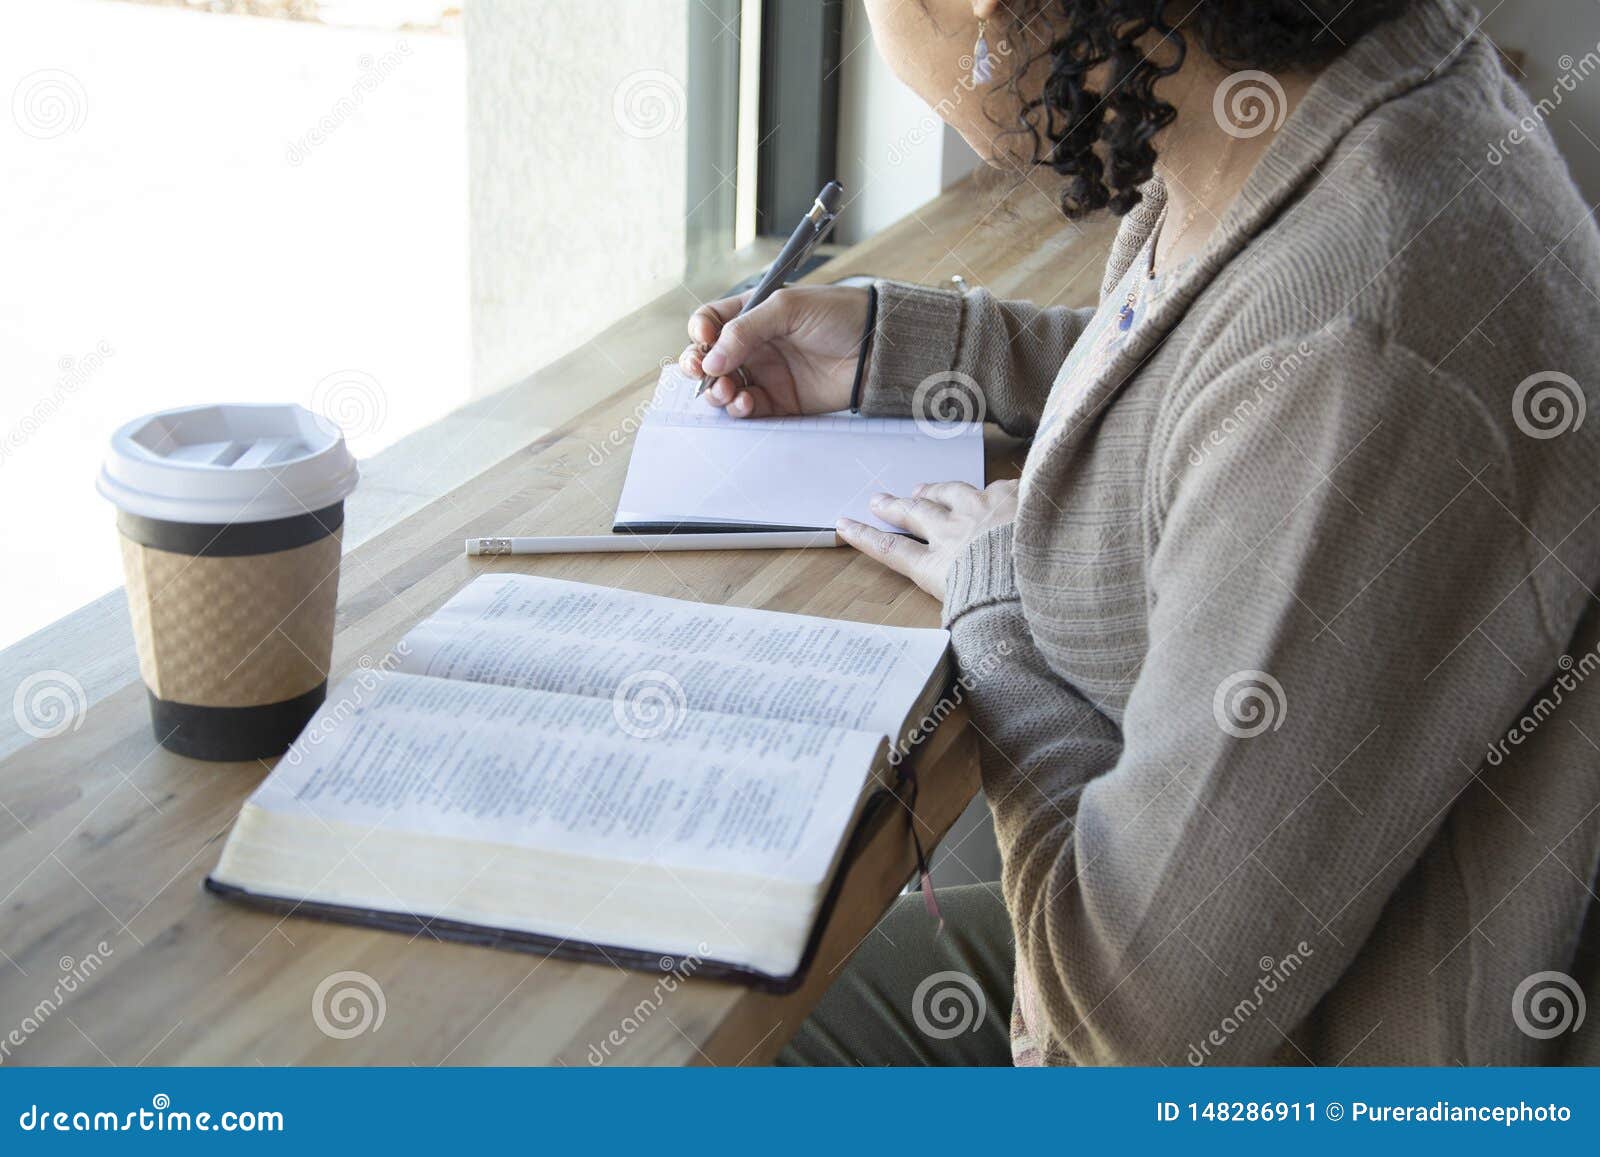 black woman studies her bible and takes notes